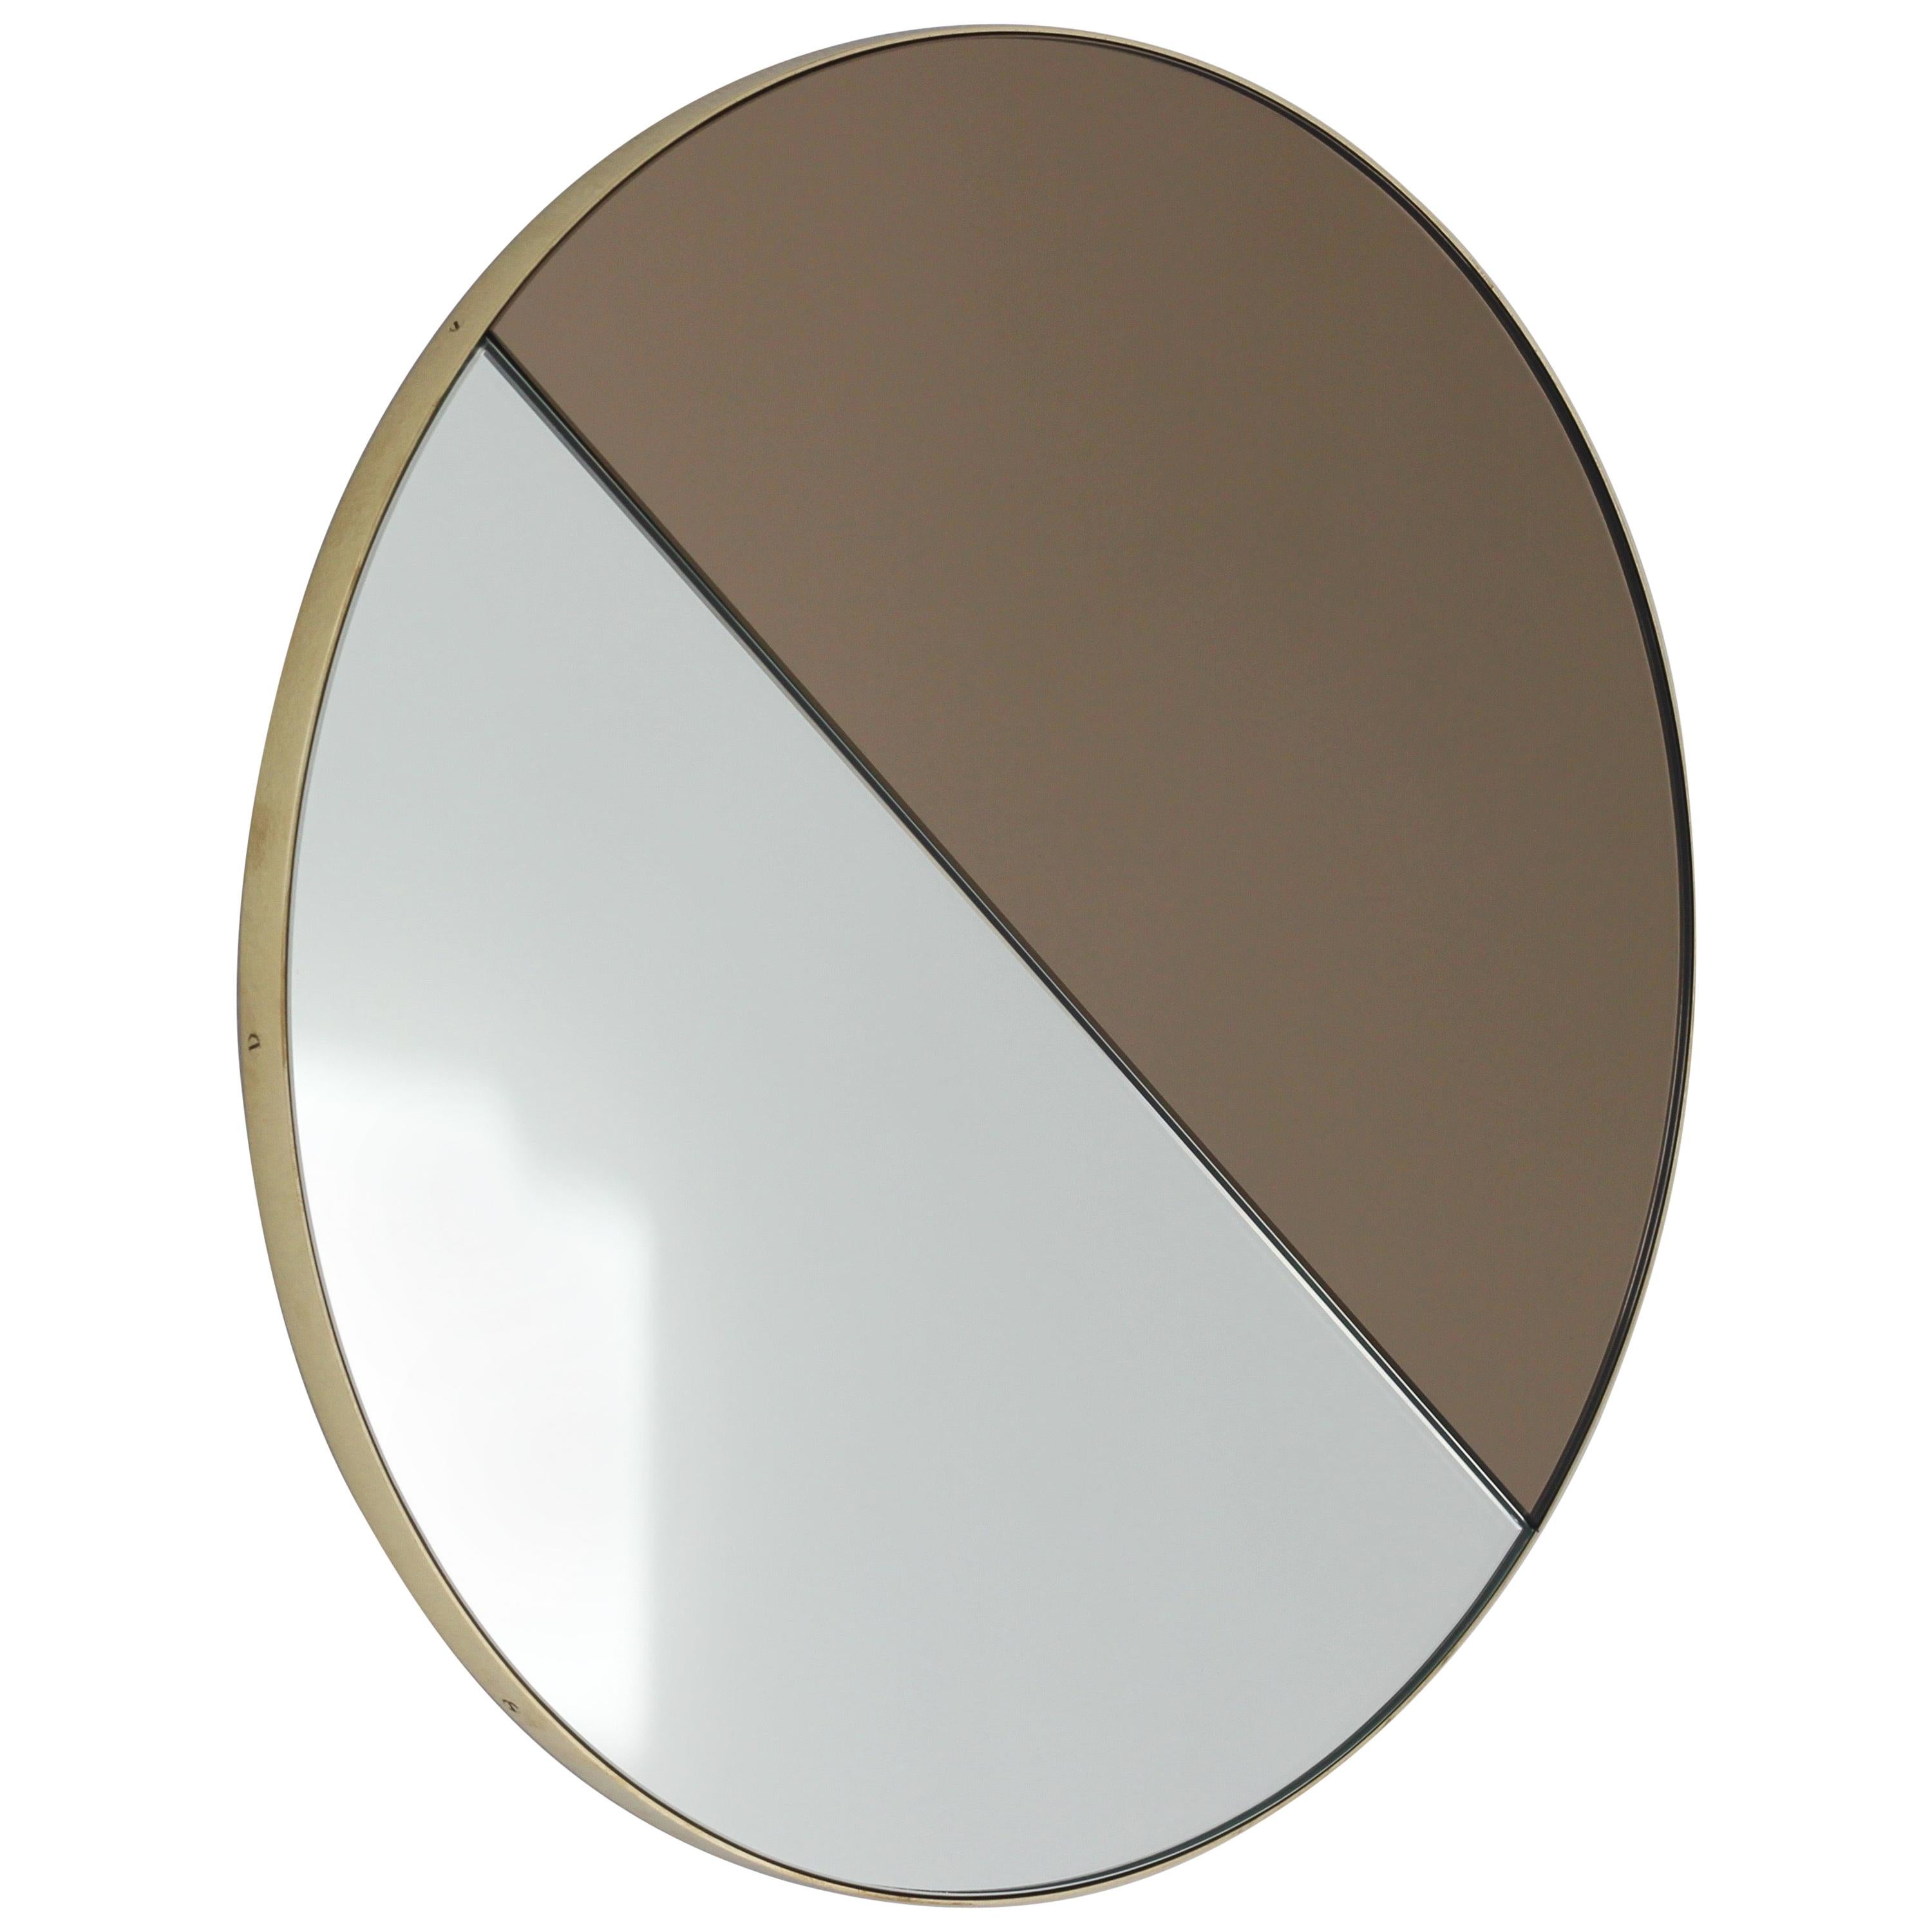 Orbis Dualis Mixed Tinted Silver Bronze Round Mirror with Brass Frame, Small